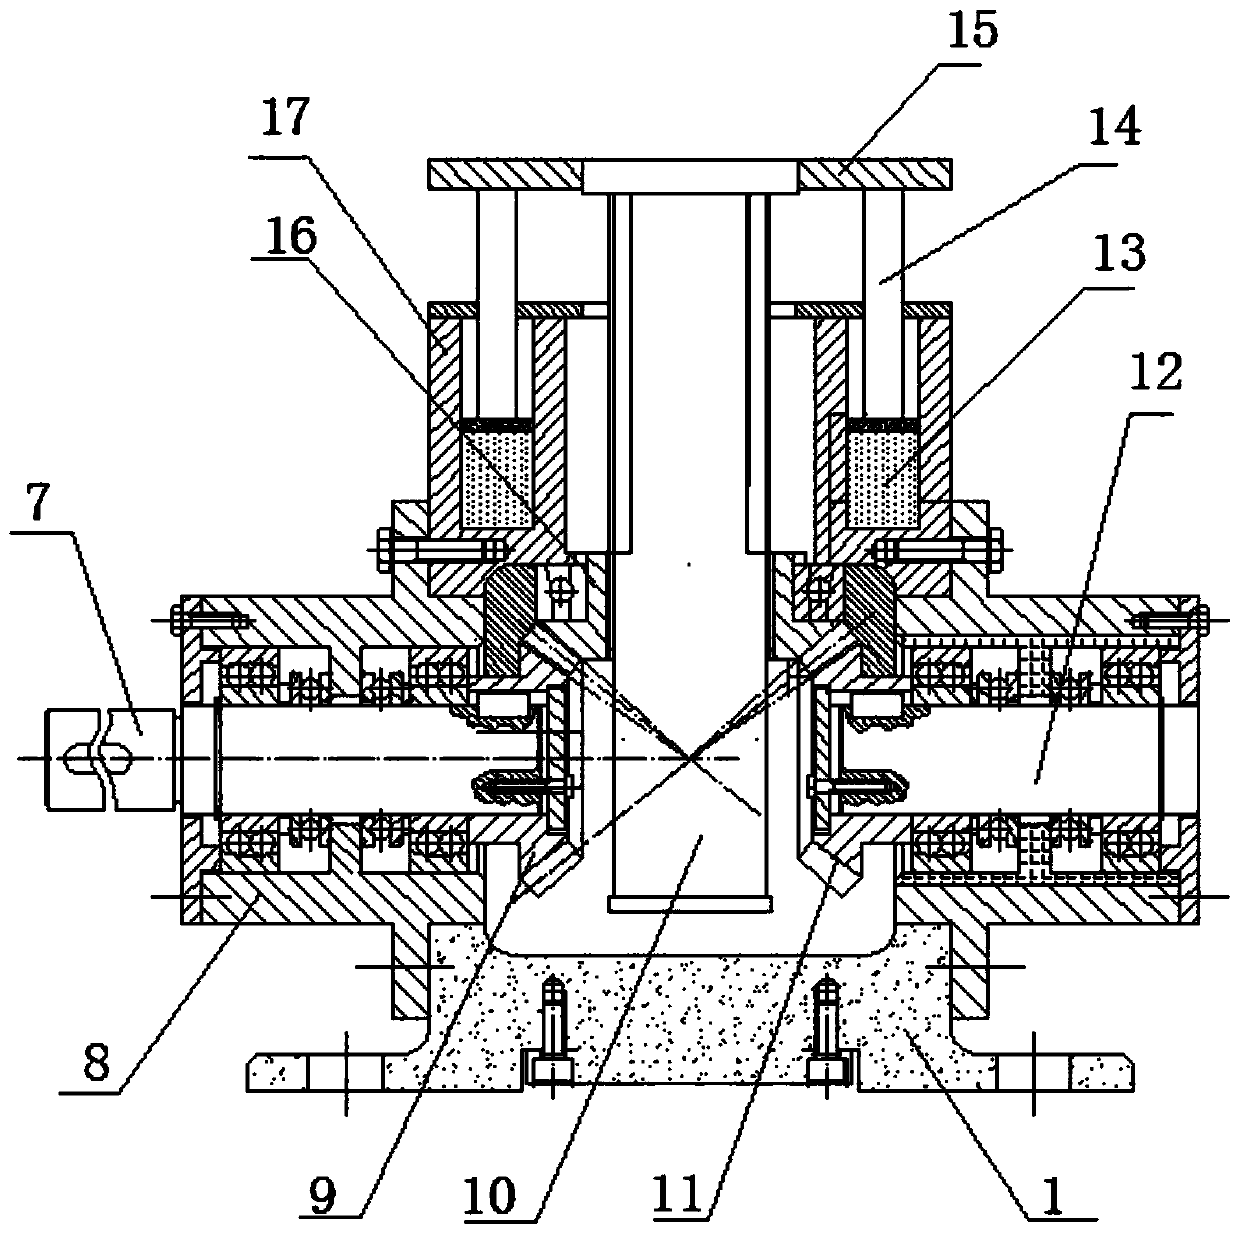 Automatic fixture capable of lifting and rotating for precision part processing